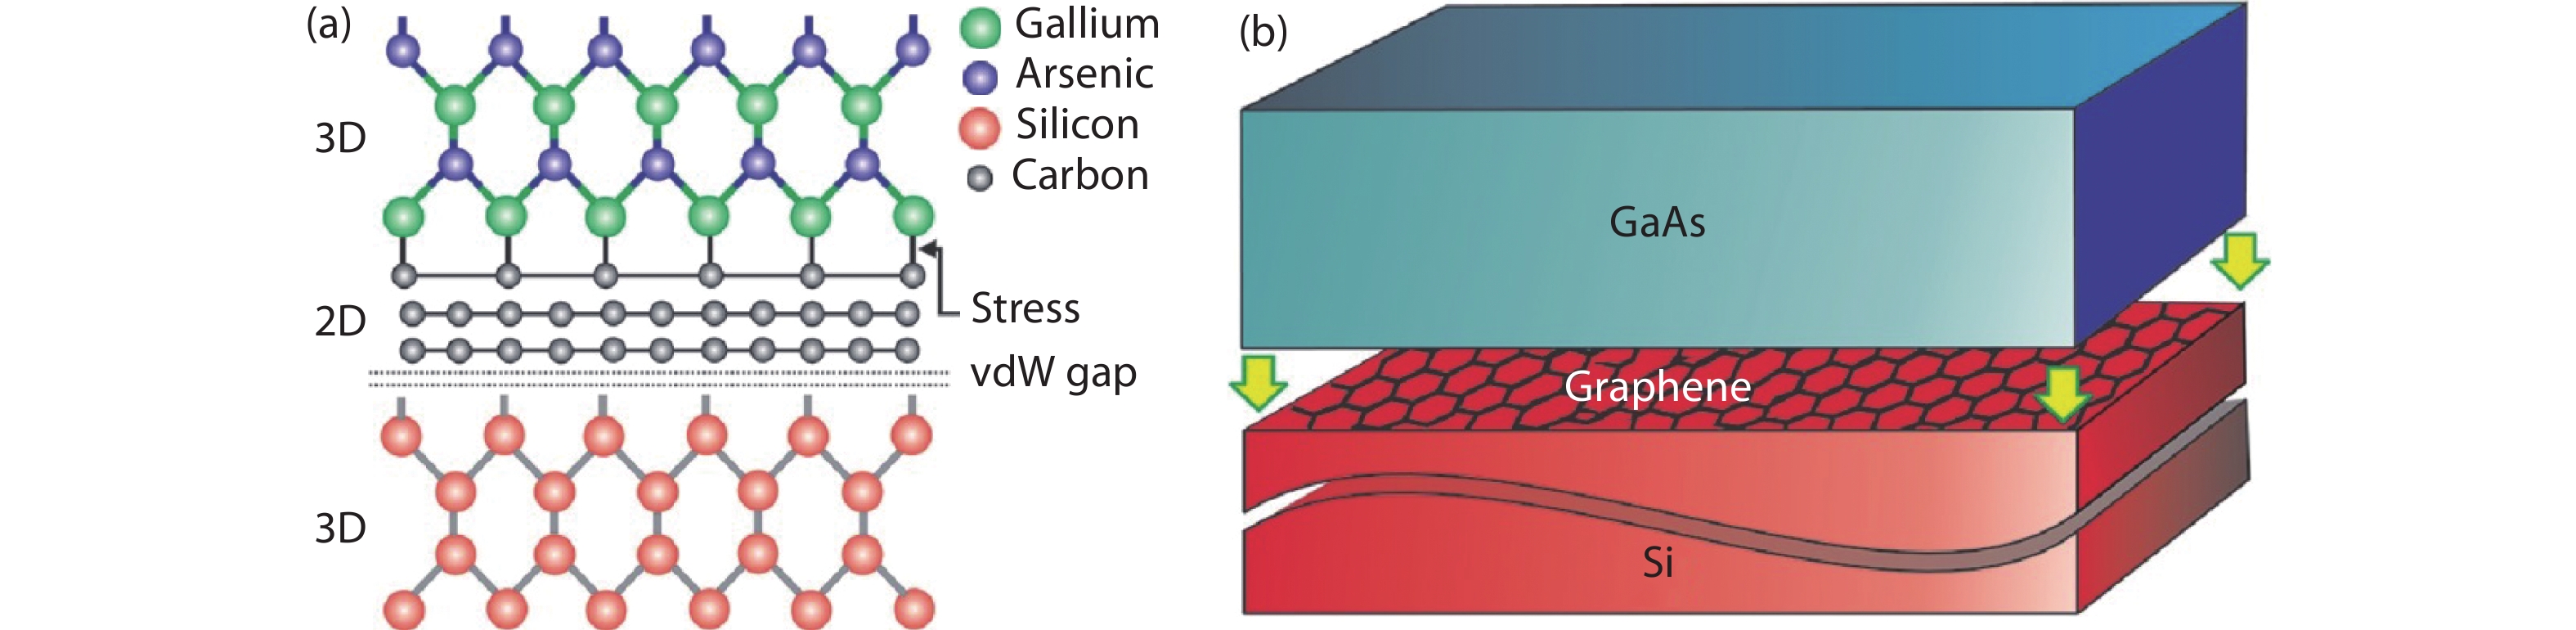 (Color online) (a) Schematic atomic geometry and (b) schematic epitaxial structure of GaAs thin film on graphene-coated Si substrate[3].